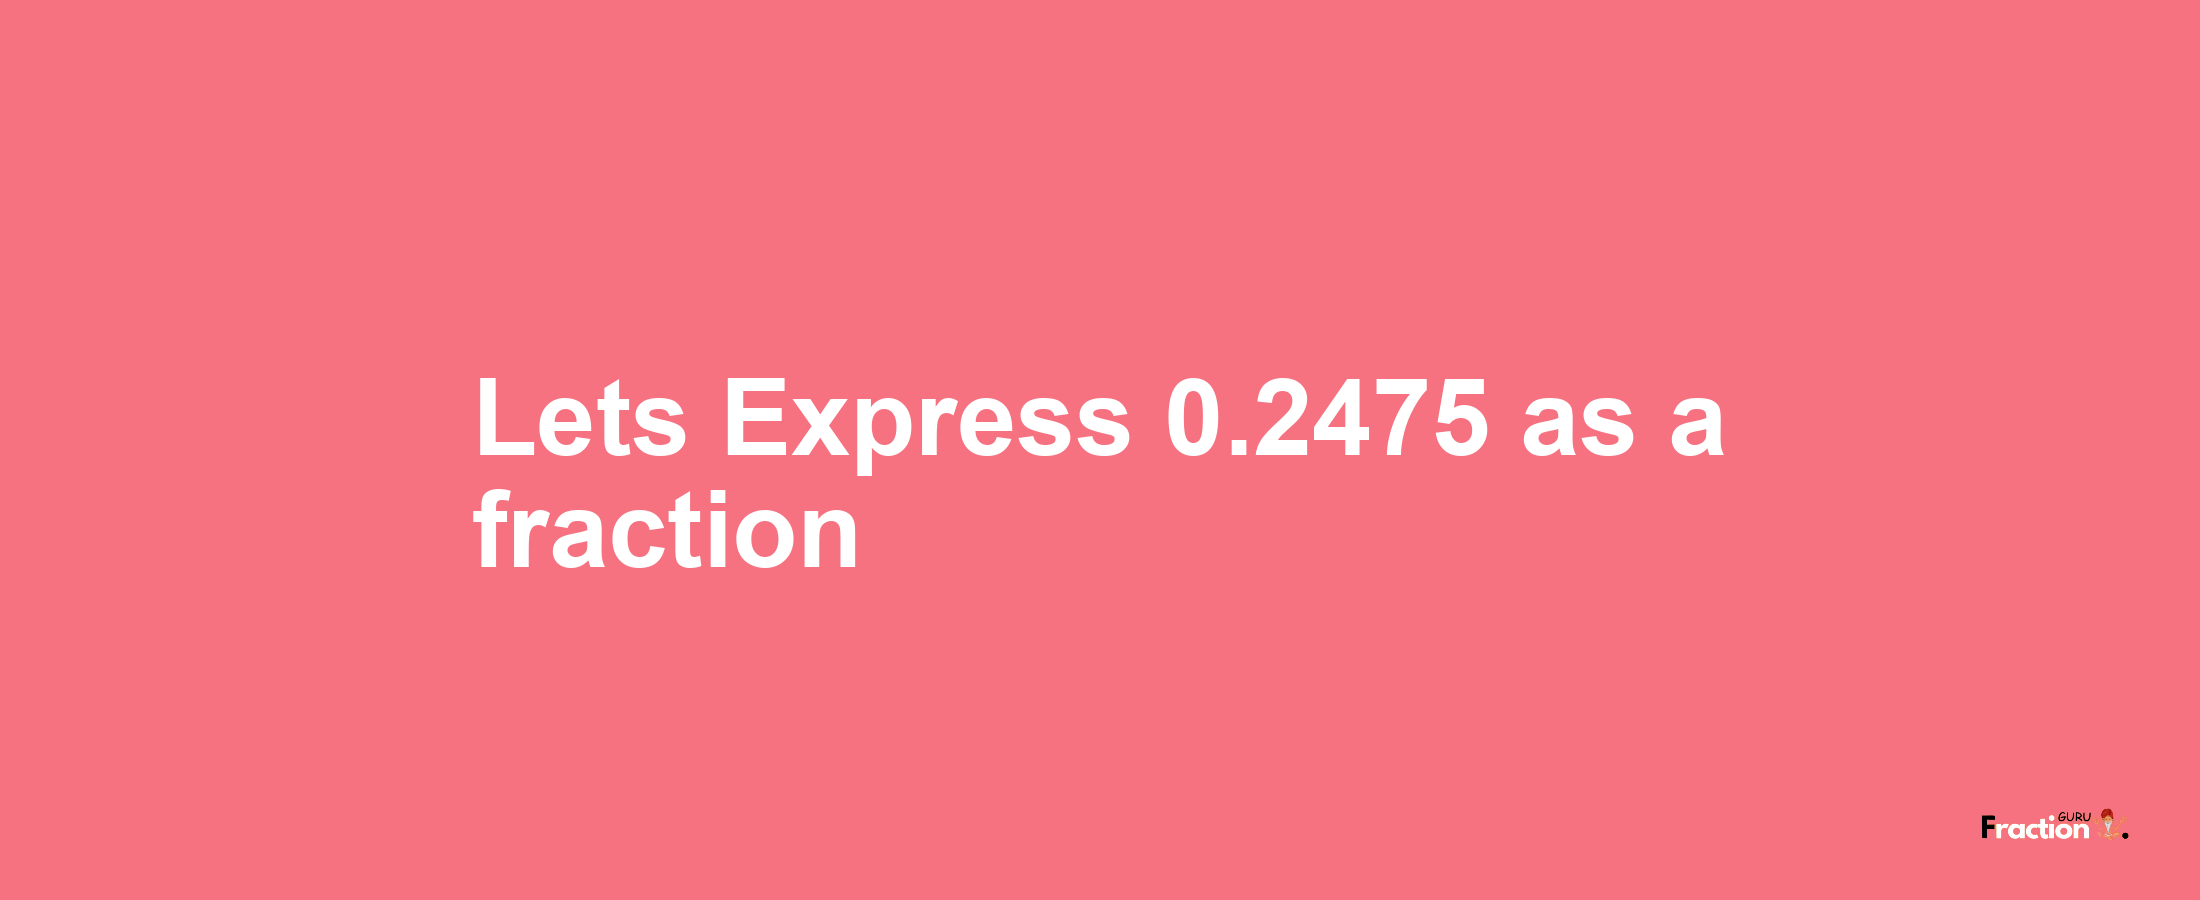 Lets Express 0.2475 as afraction